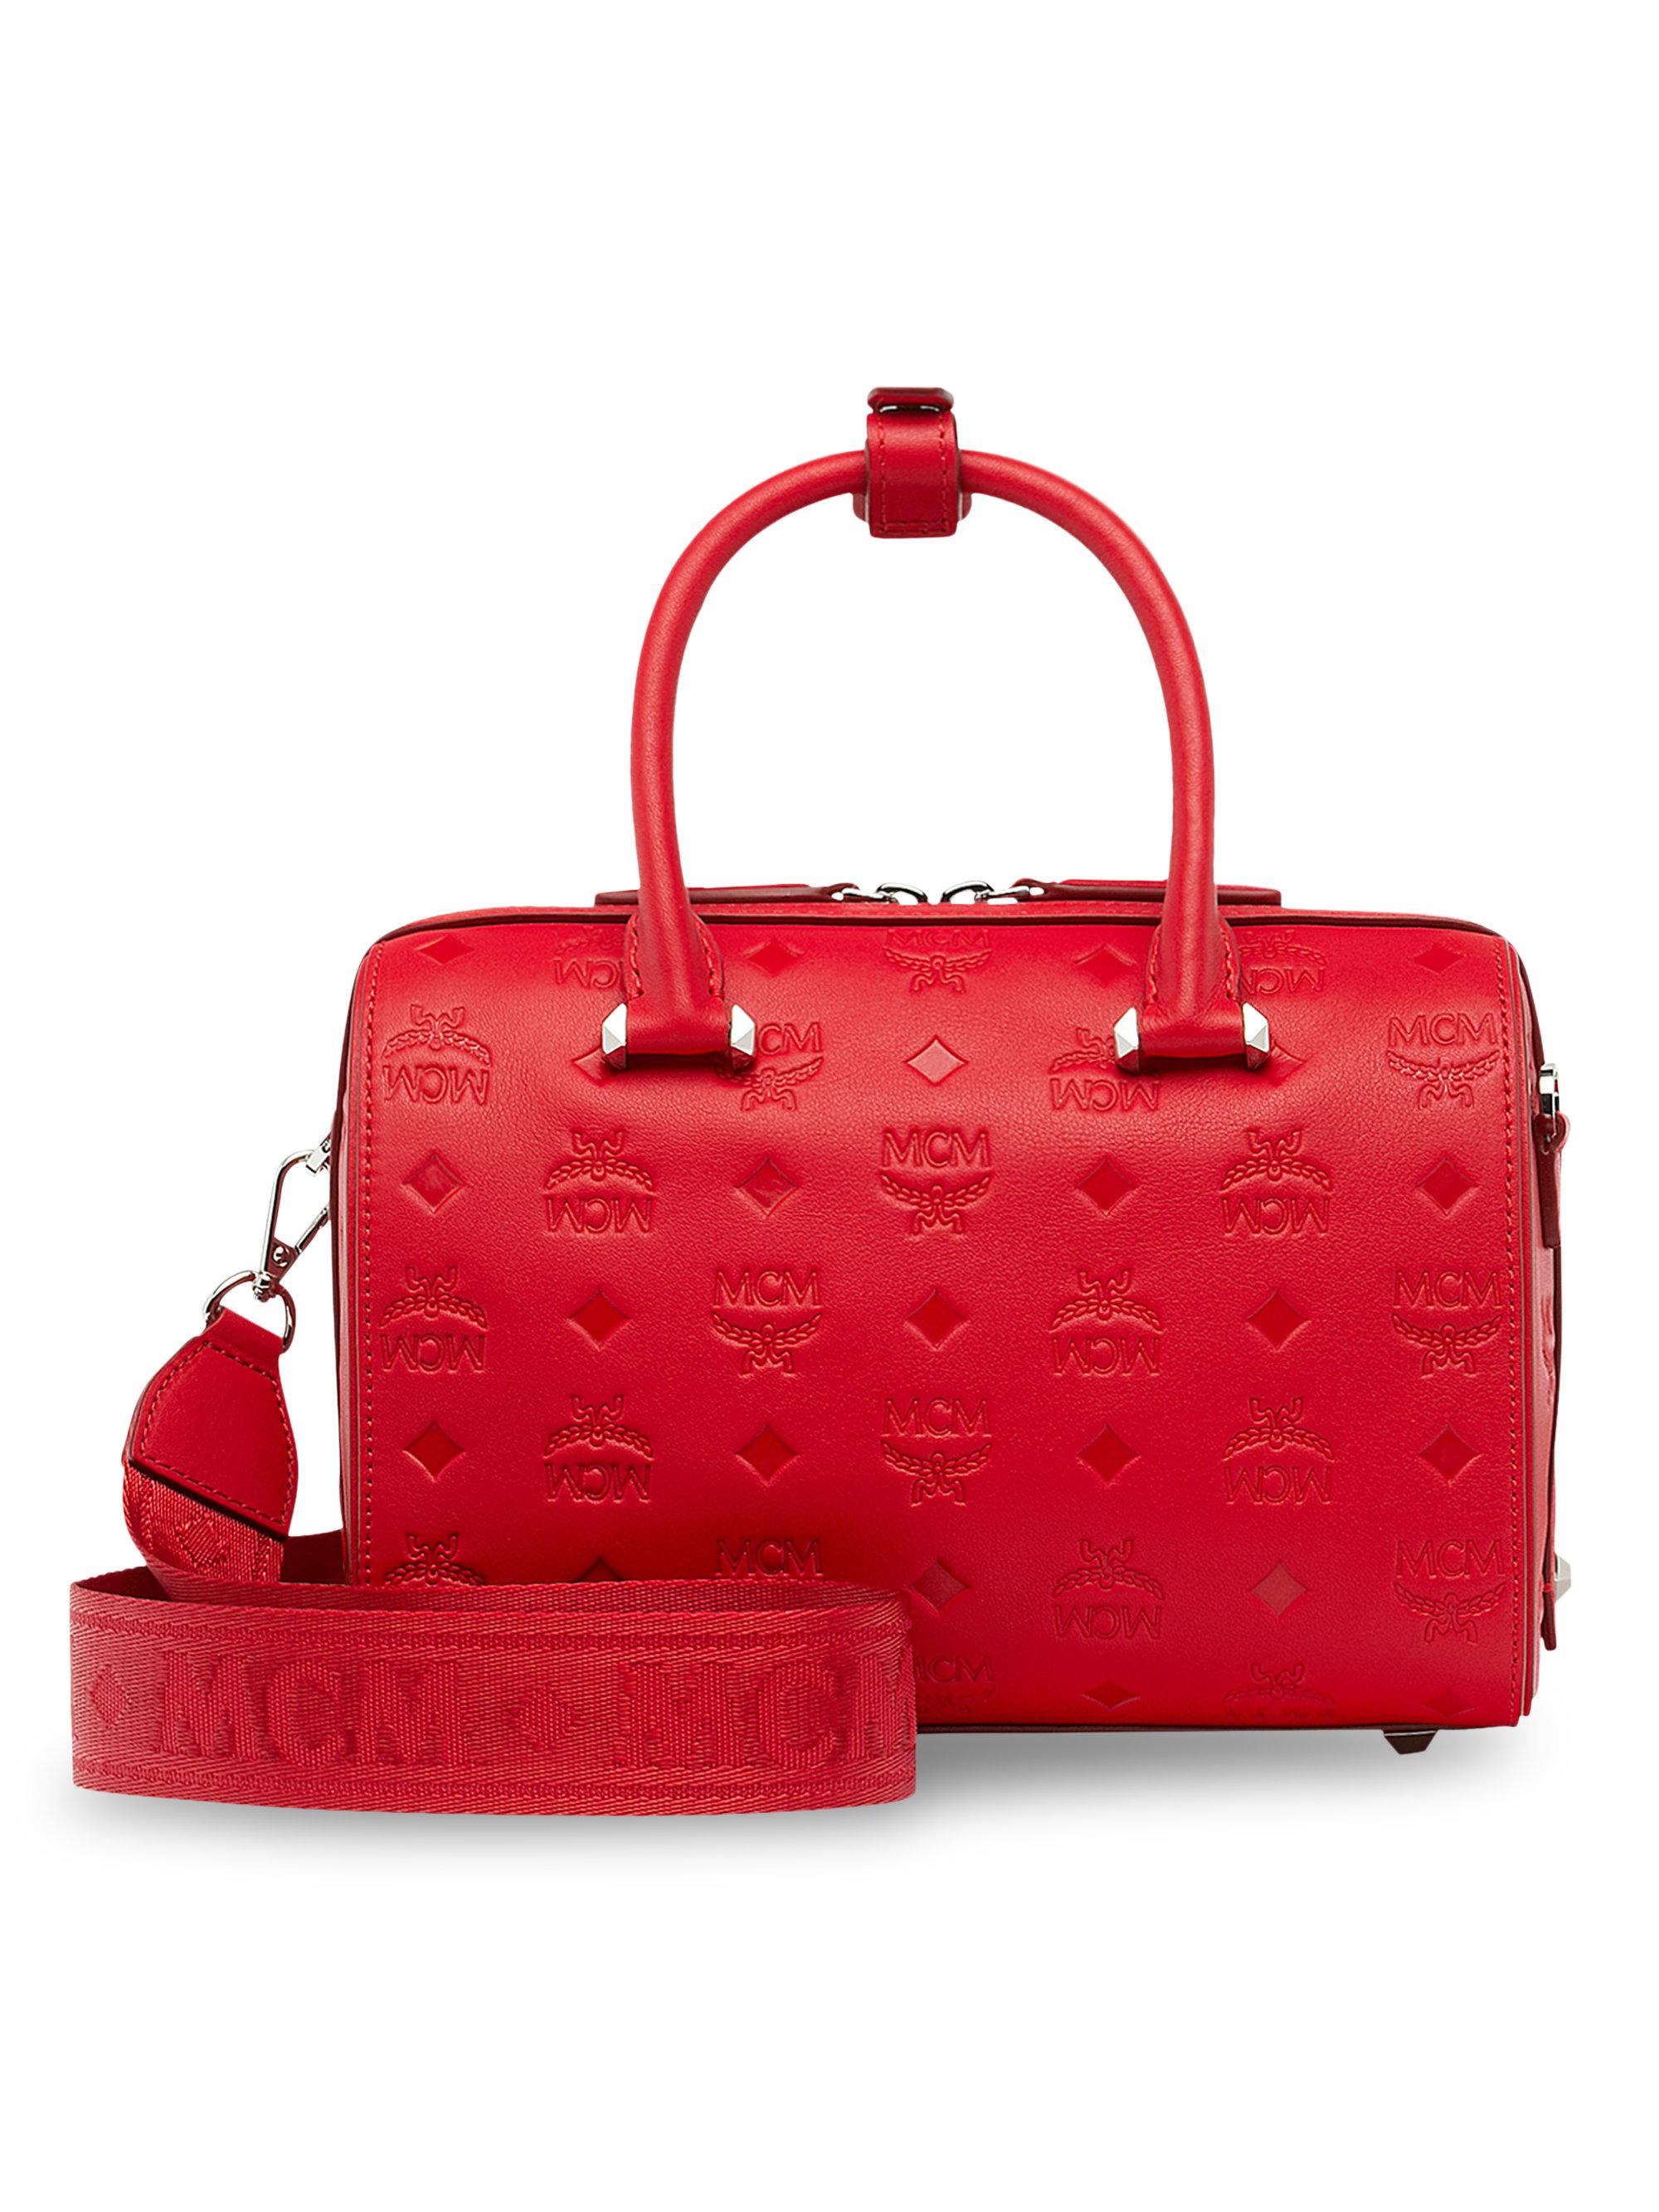 MCM Boston Essential Monogrammed Small Leather Satchel in Red